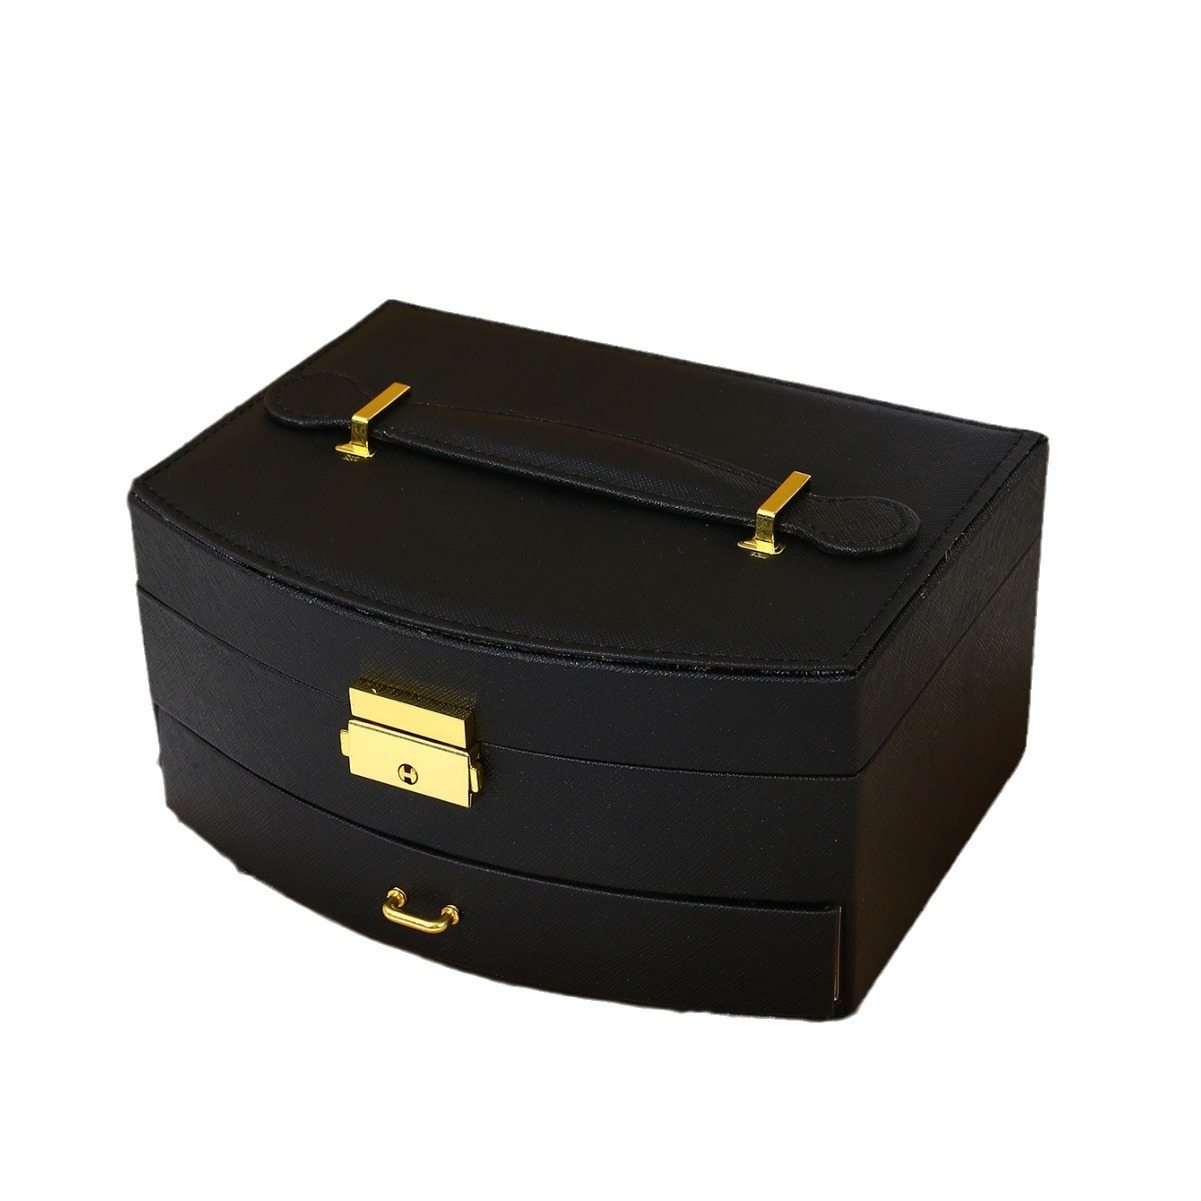 Fan-Shaped Jewelry Box with Lock Double Drawer Children's Jewelry Storage Box Travel Ring Necklace Earrings Jewelry Box